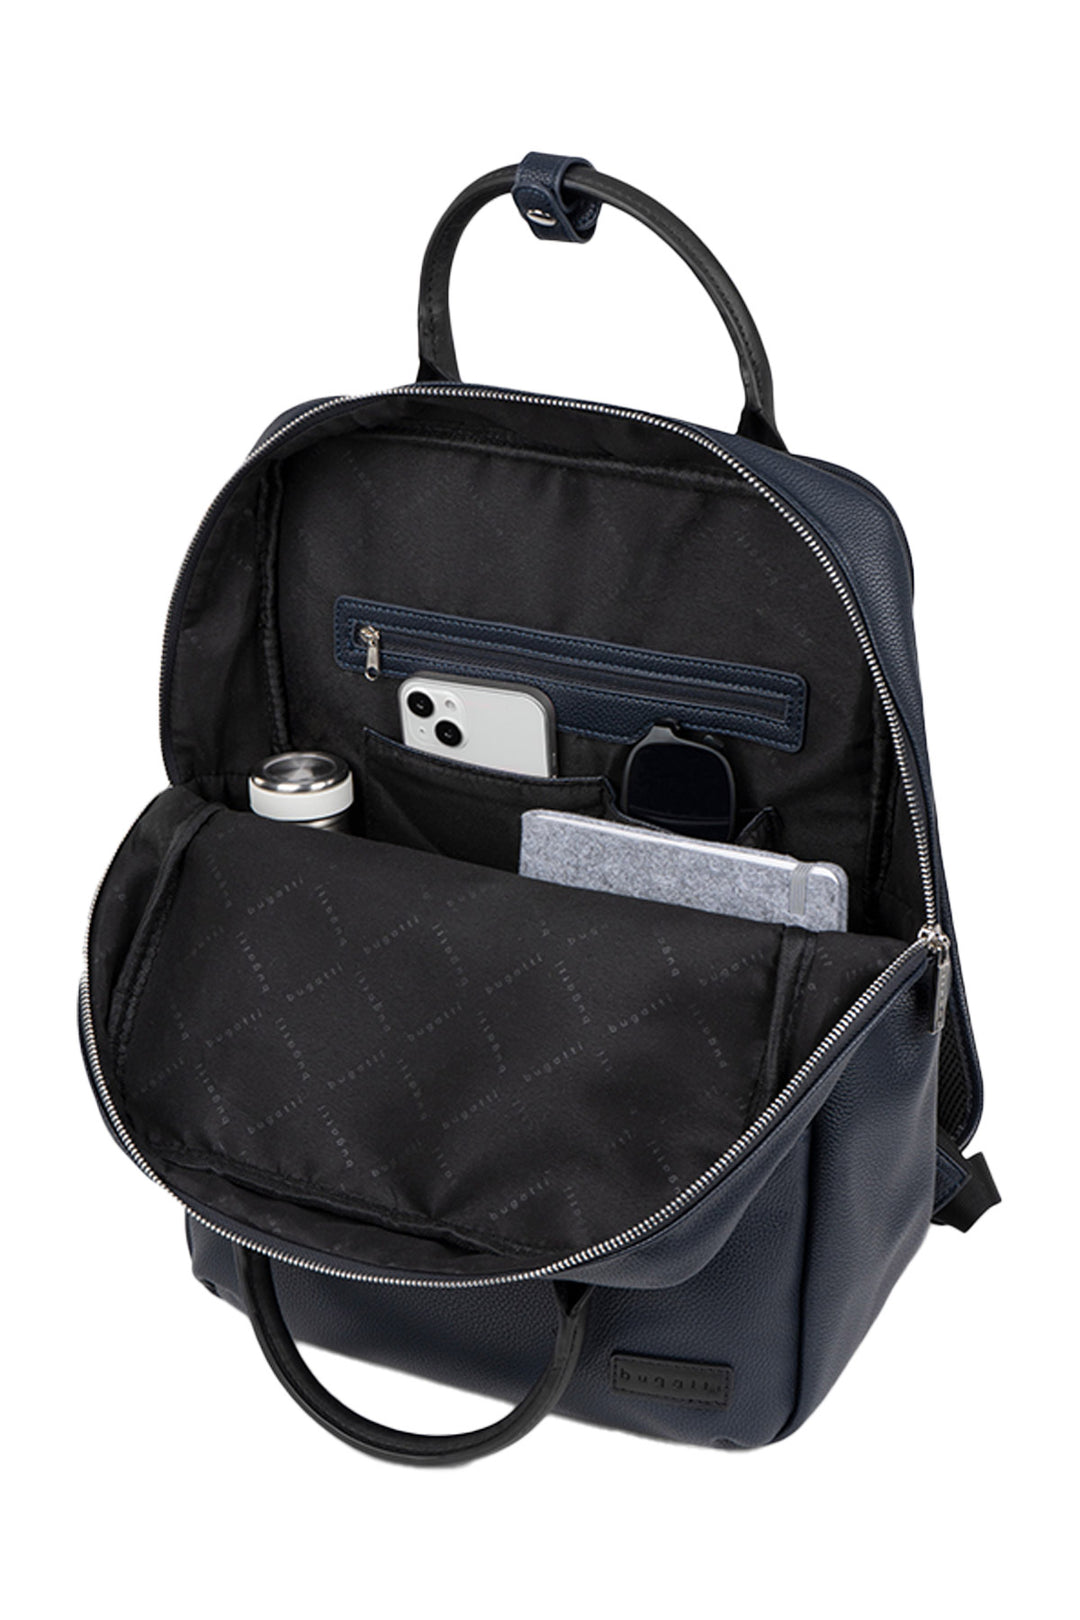 Bugatti Contrast Collection Backpack